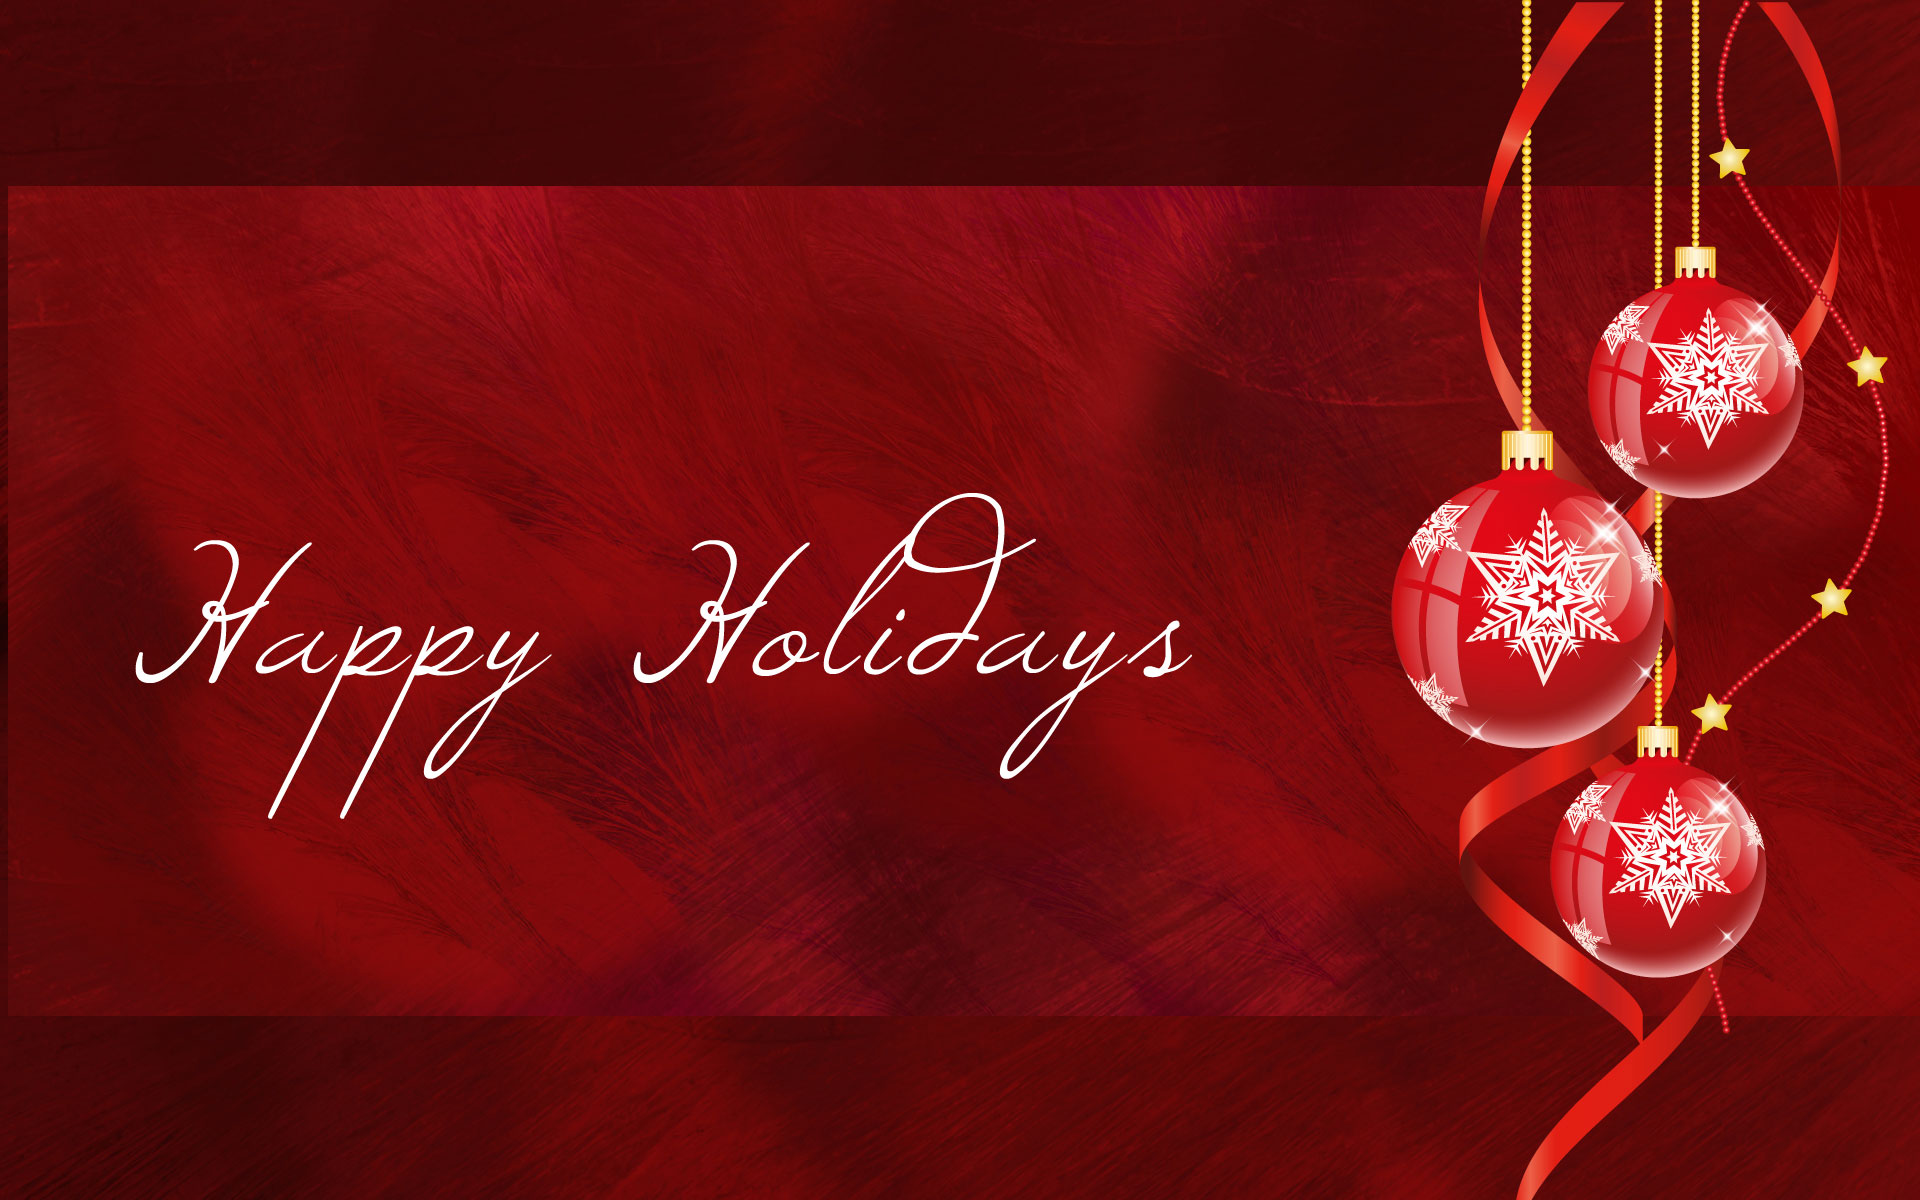 Gallery For Gt Happy Holidays Wallpaper